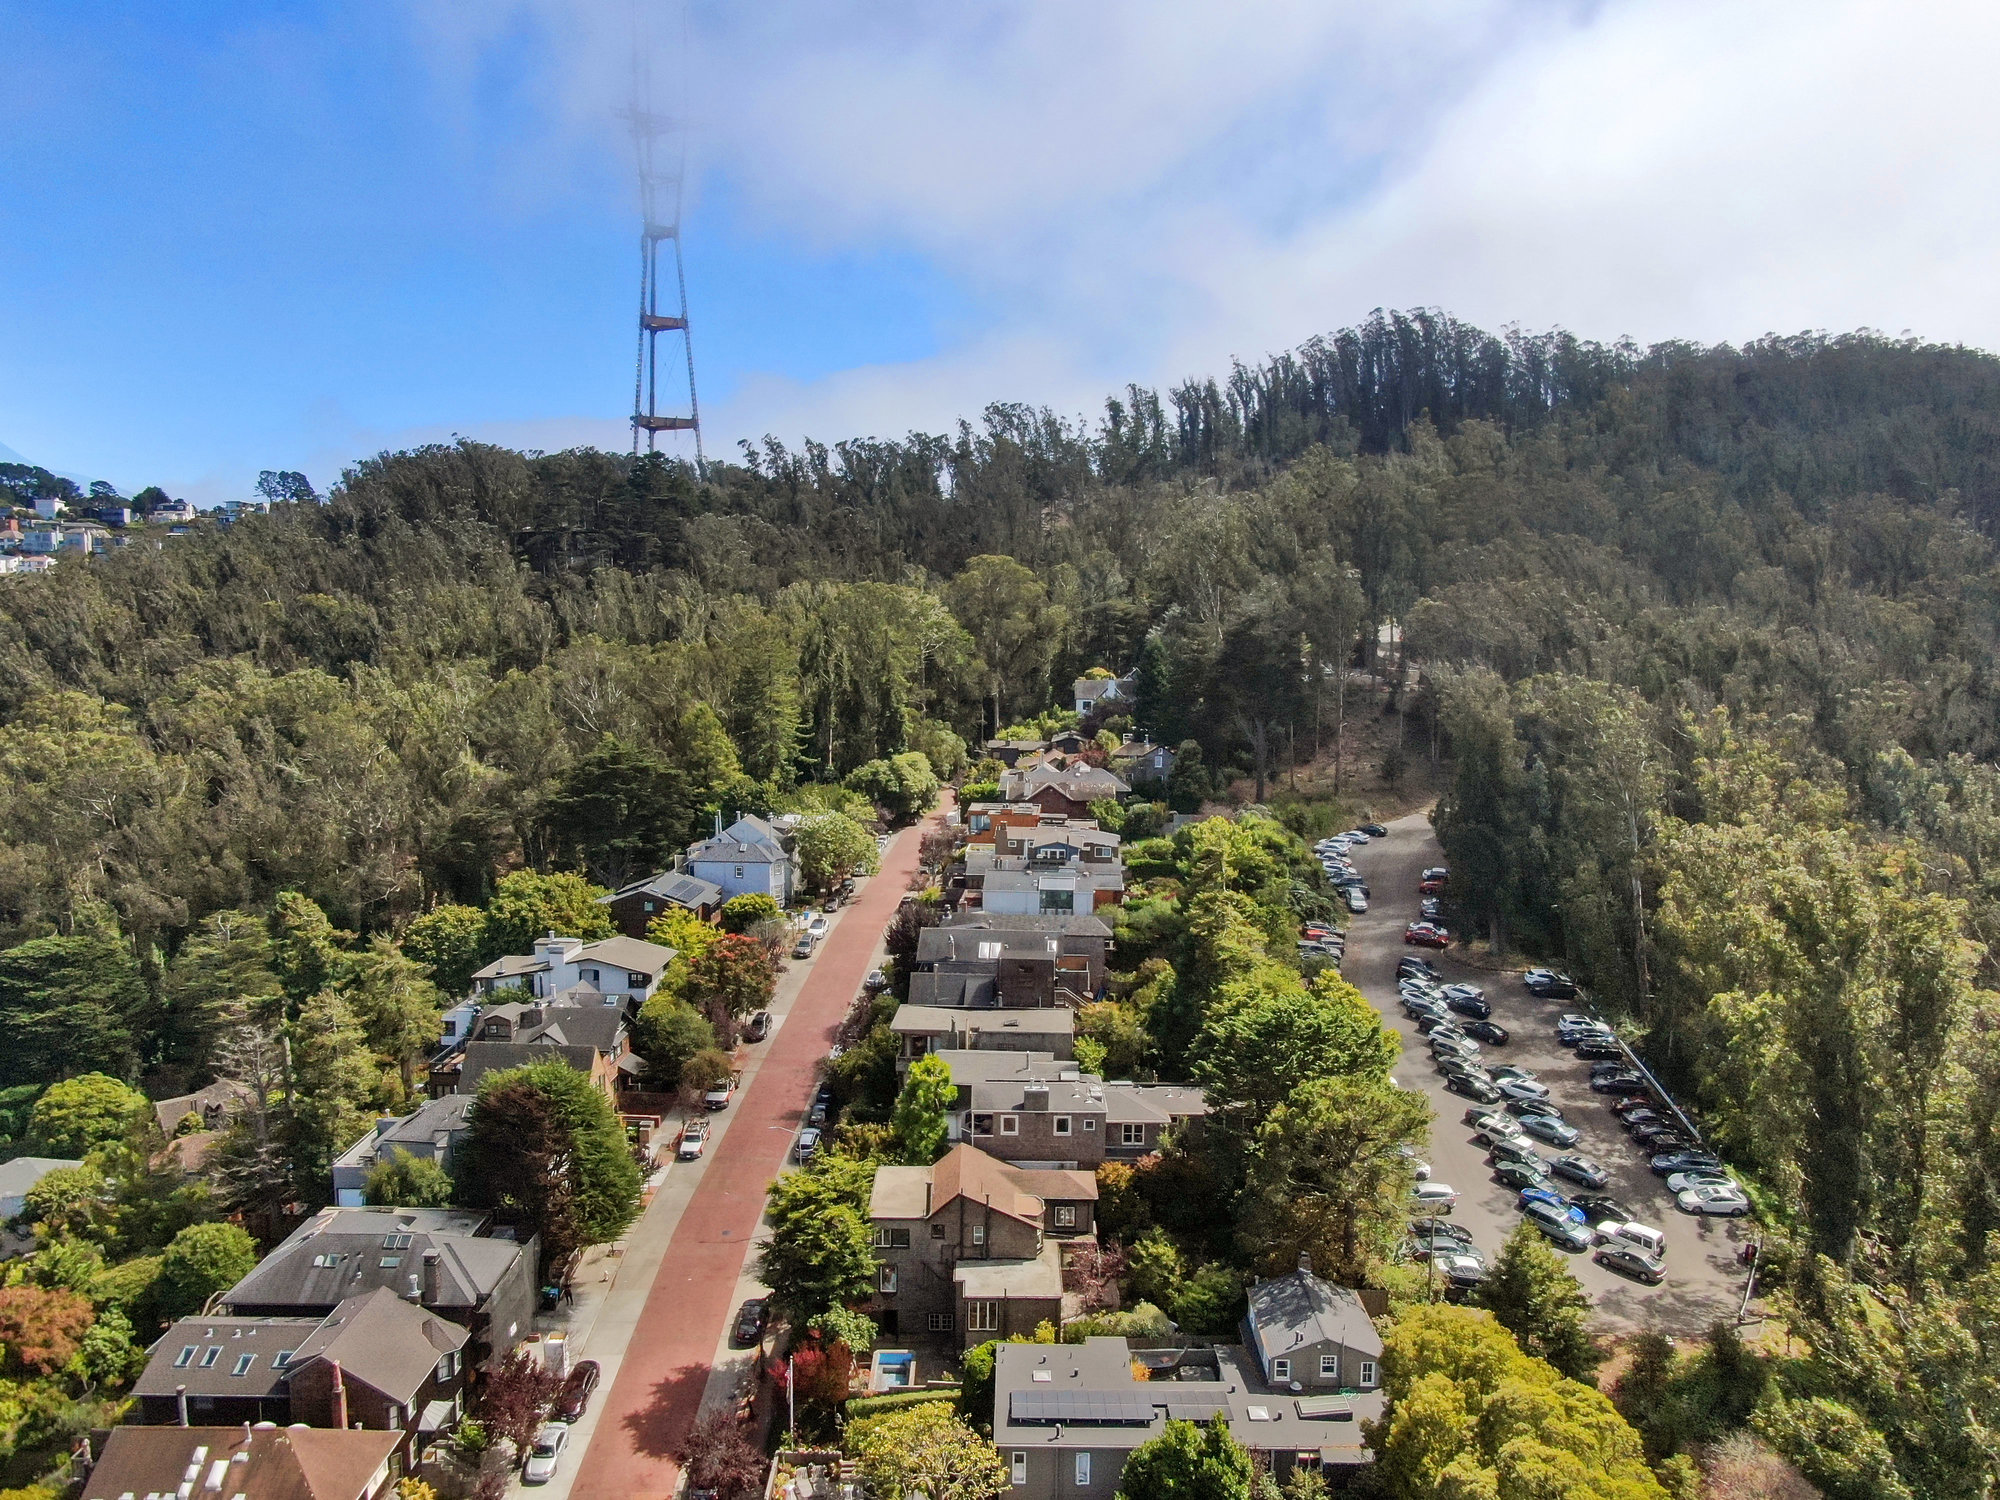 Property Photo: Aerial view of 183 Edgewood Avenue, showing the red brick road of Edgewood and proximity to UCSF parking